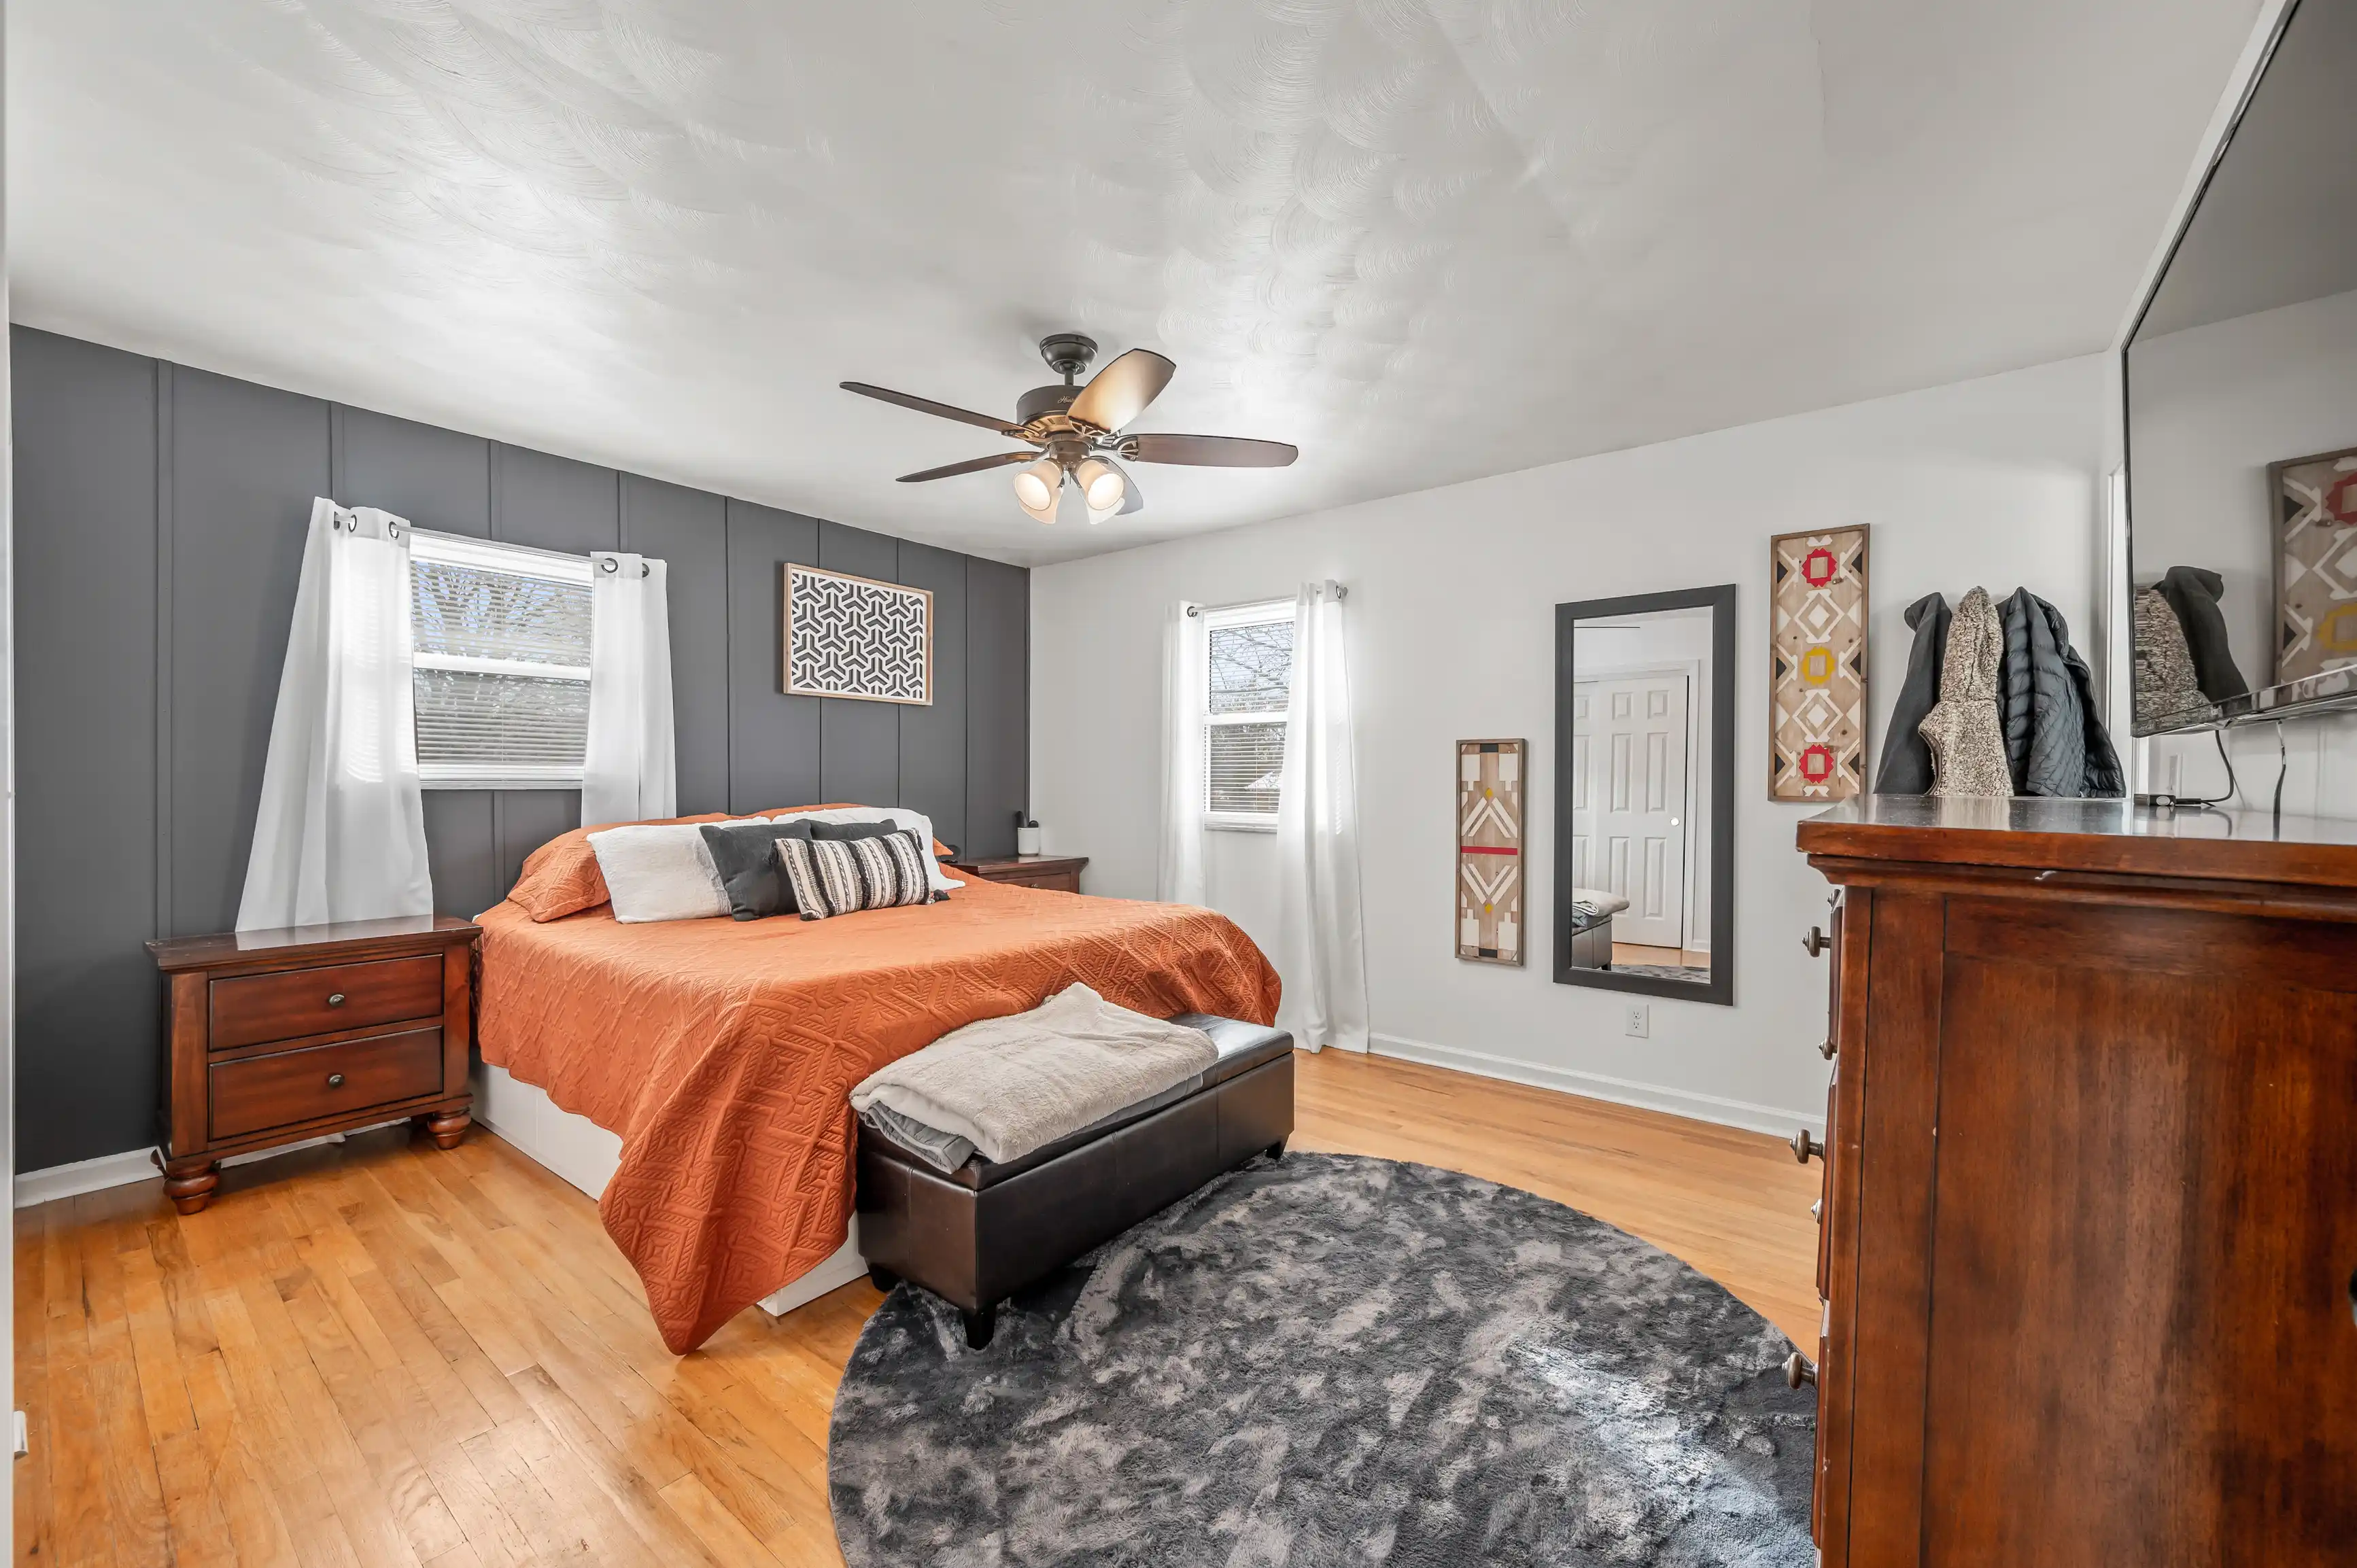 A tastefully decorated bedroom with gray walls, hardwood floors, a burnt orange bedspread, and a central ceiling fan. Various pieces of wooden furniture and decorative wall art complete the room's modern aesthetic.